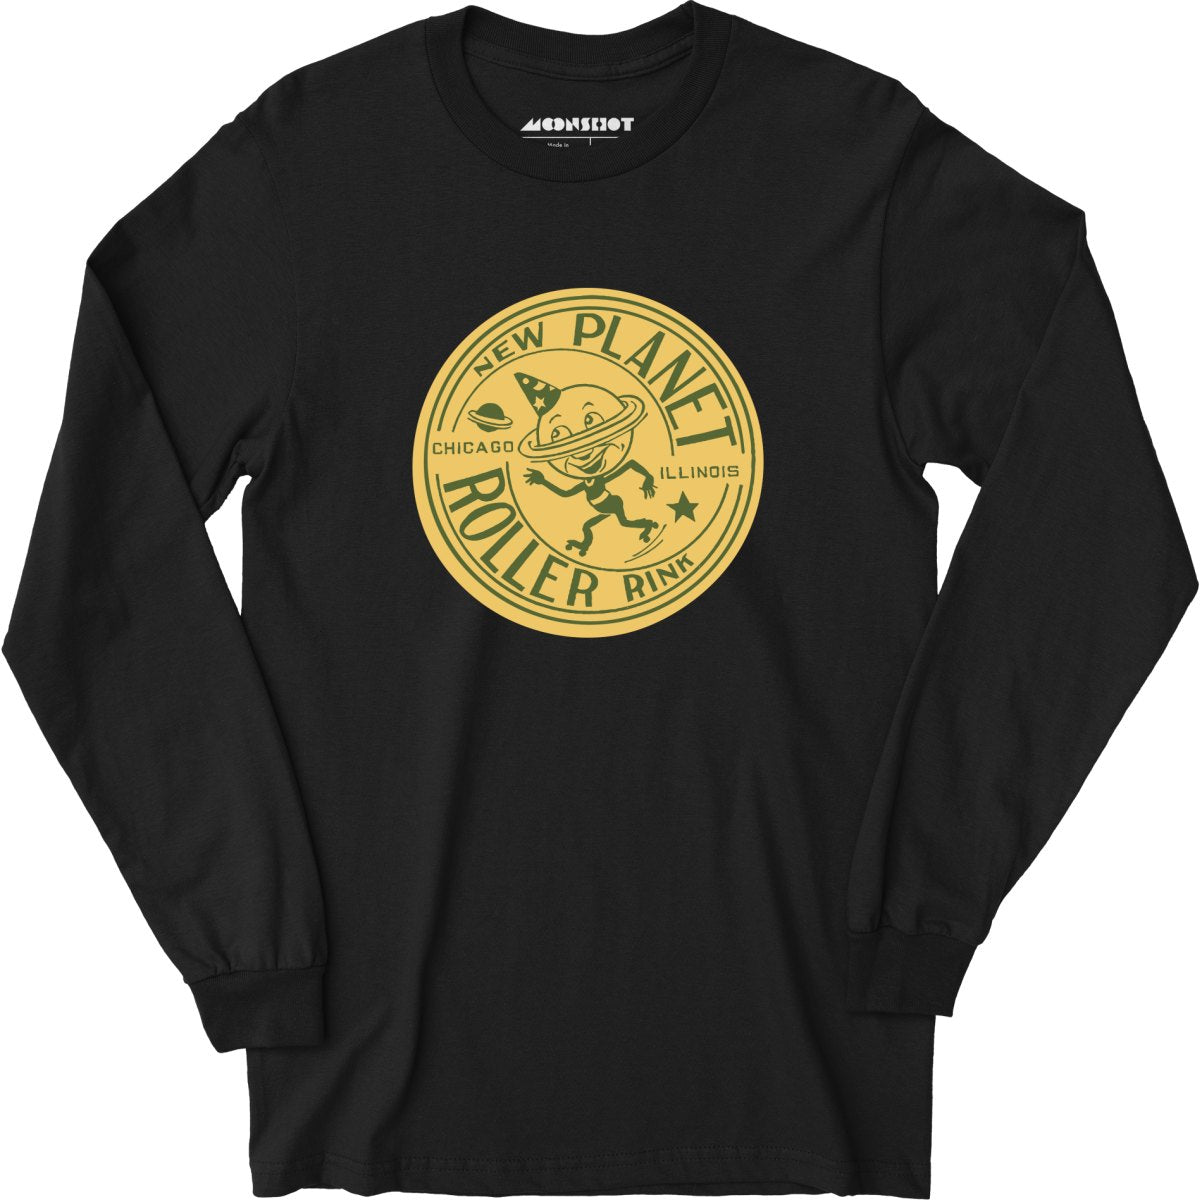 New Planet - Chicago, IL - Vintage Roller Rink - Long Sleeve T-Shirt